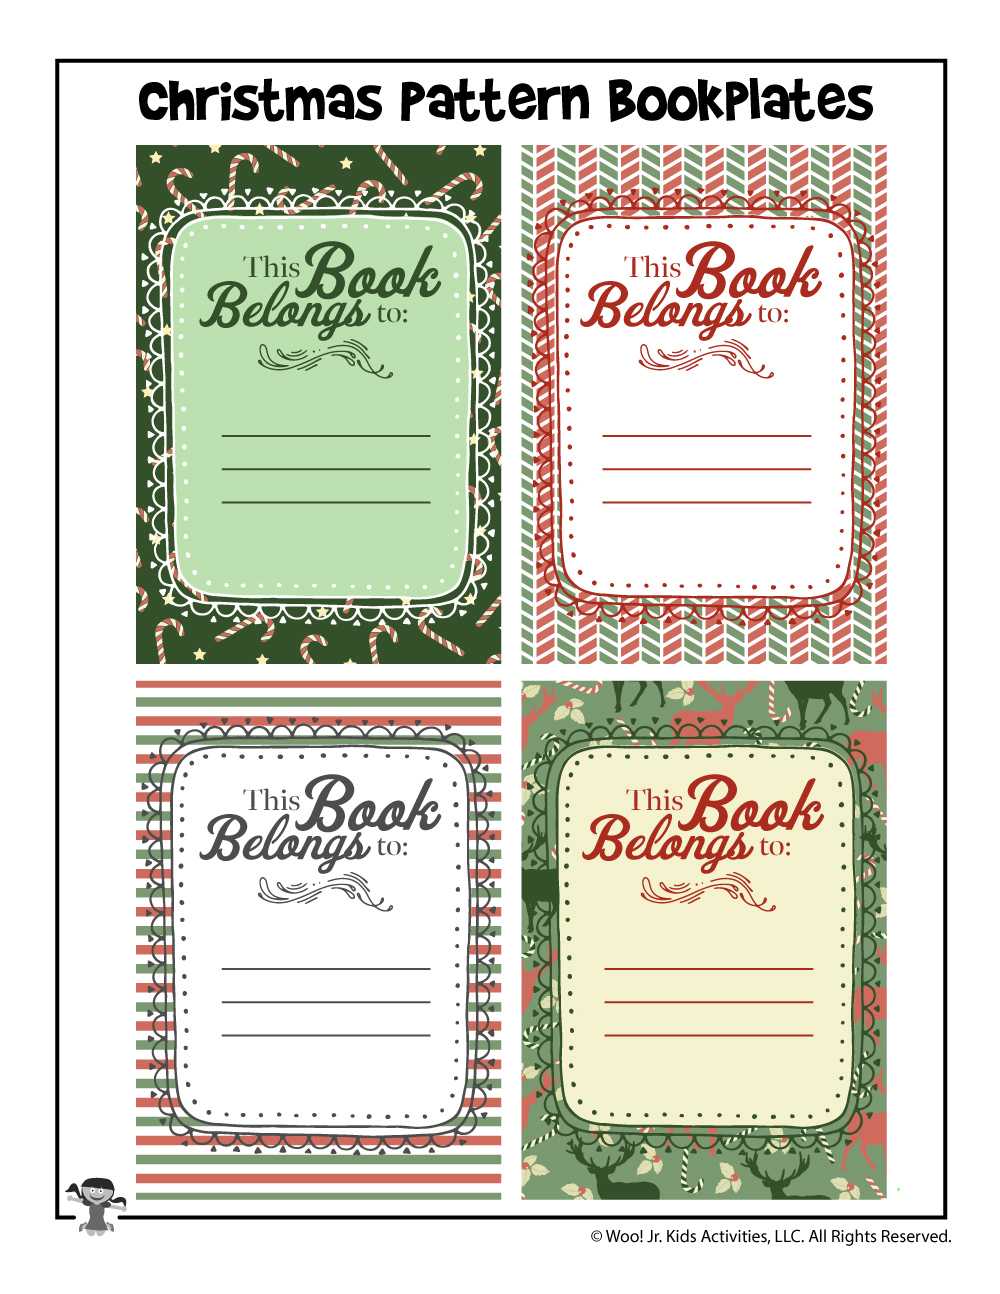 Christmas Gift Printable Bookplates | Woo! Jr. Kids Activities Throughout Bookplate Templates For Word